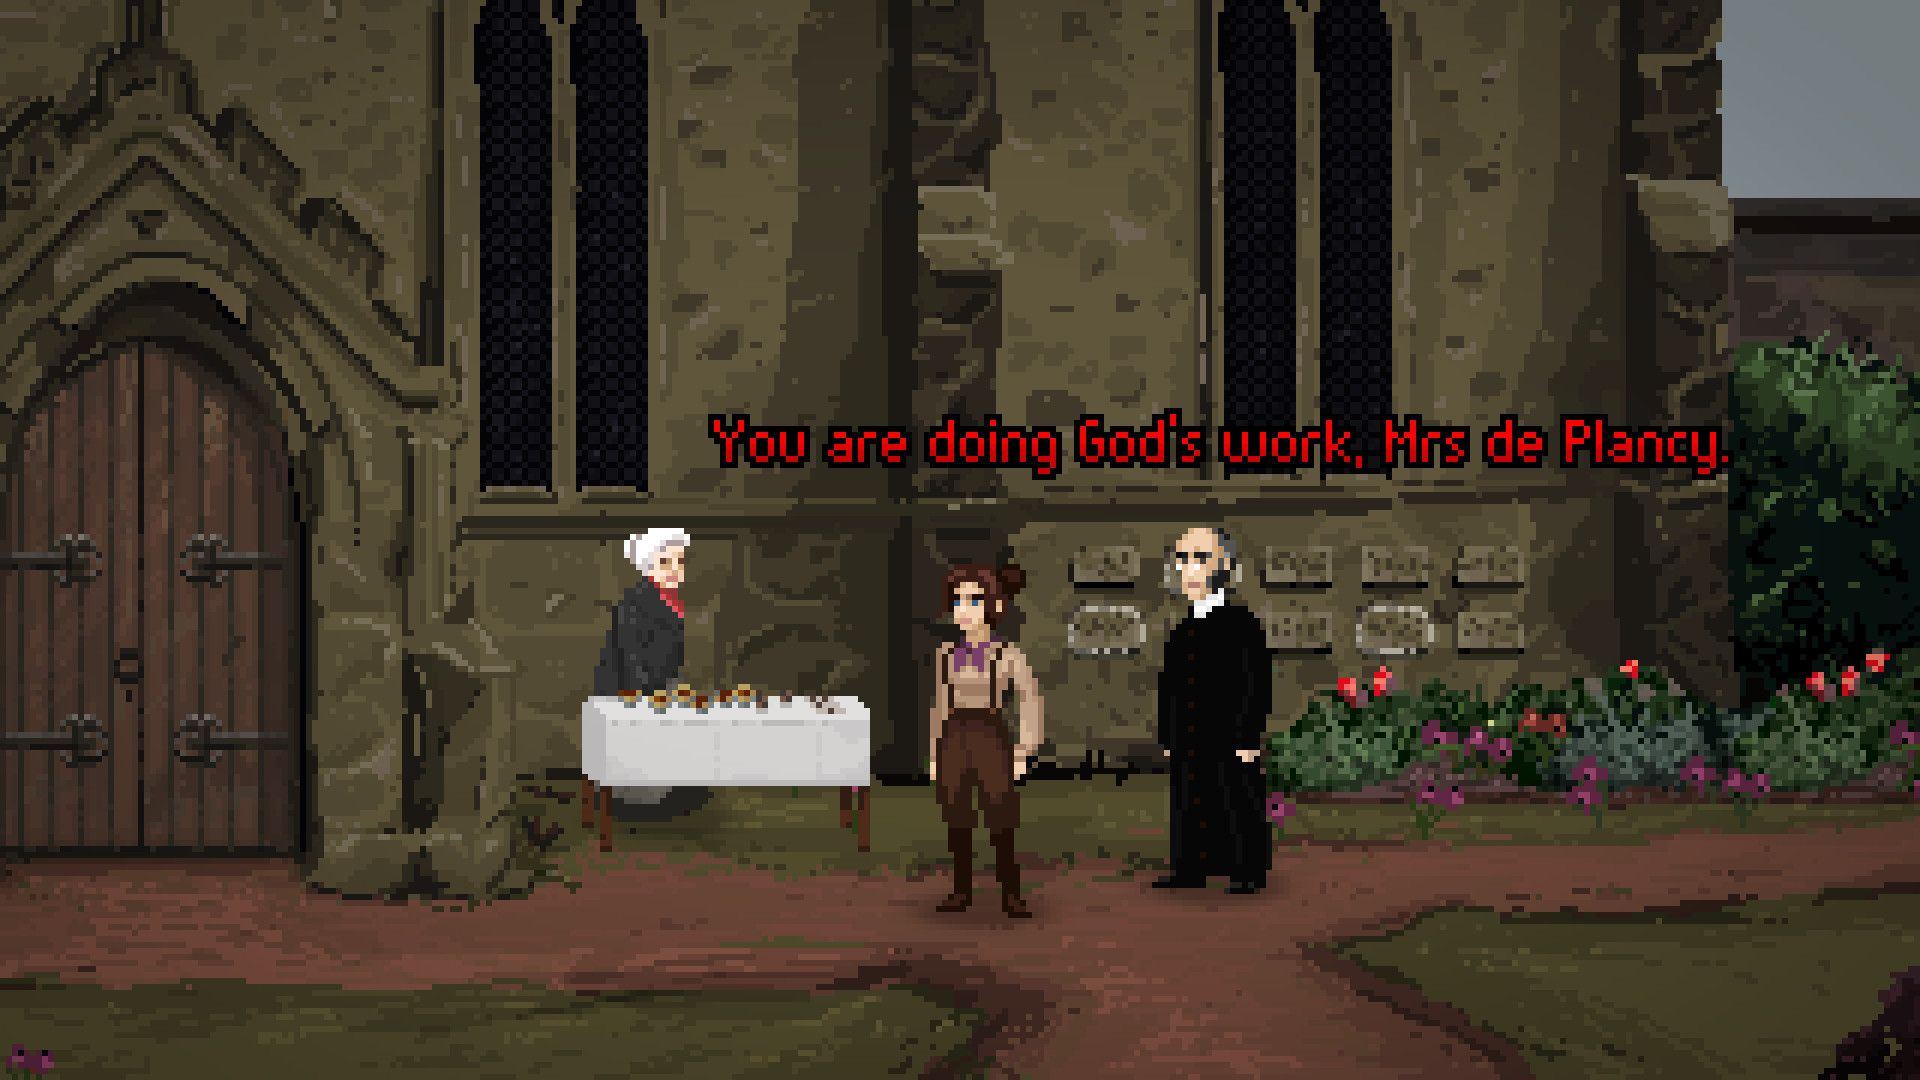 The main character in The Excavation Of Hob's Barrow, Thomasina, stands with the vicar in front of the church door.  He's saying 'You're doing God's work, Mrs de Plancy' to the old lady running the cake stall at the door.